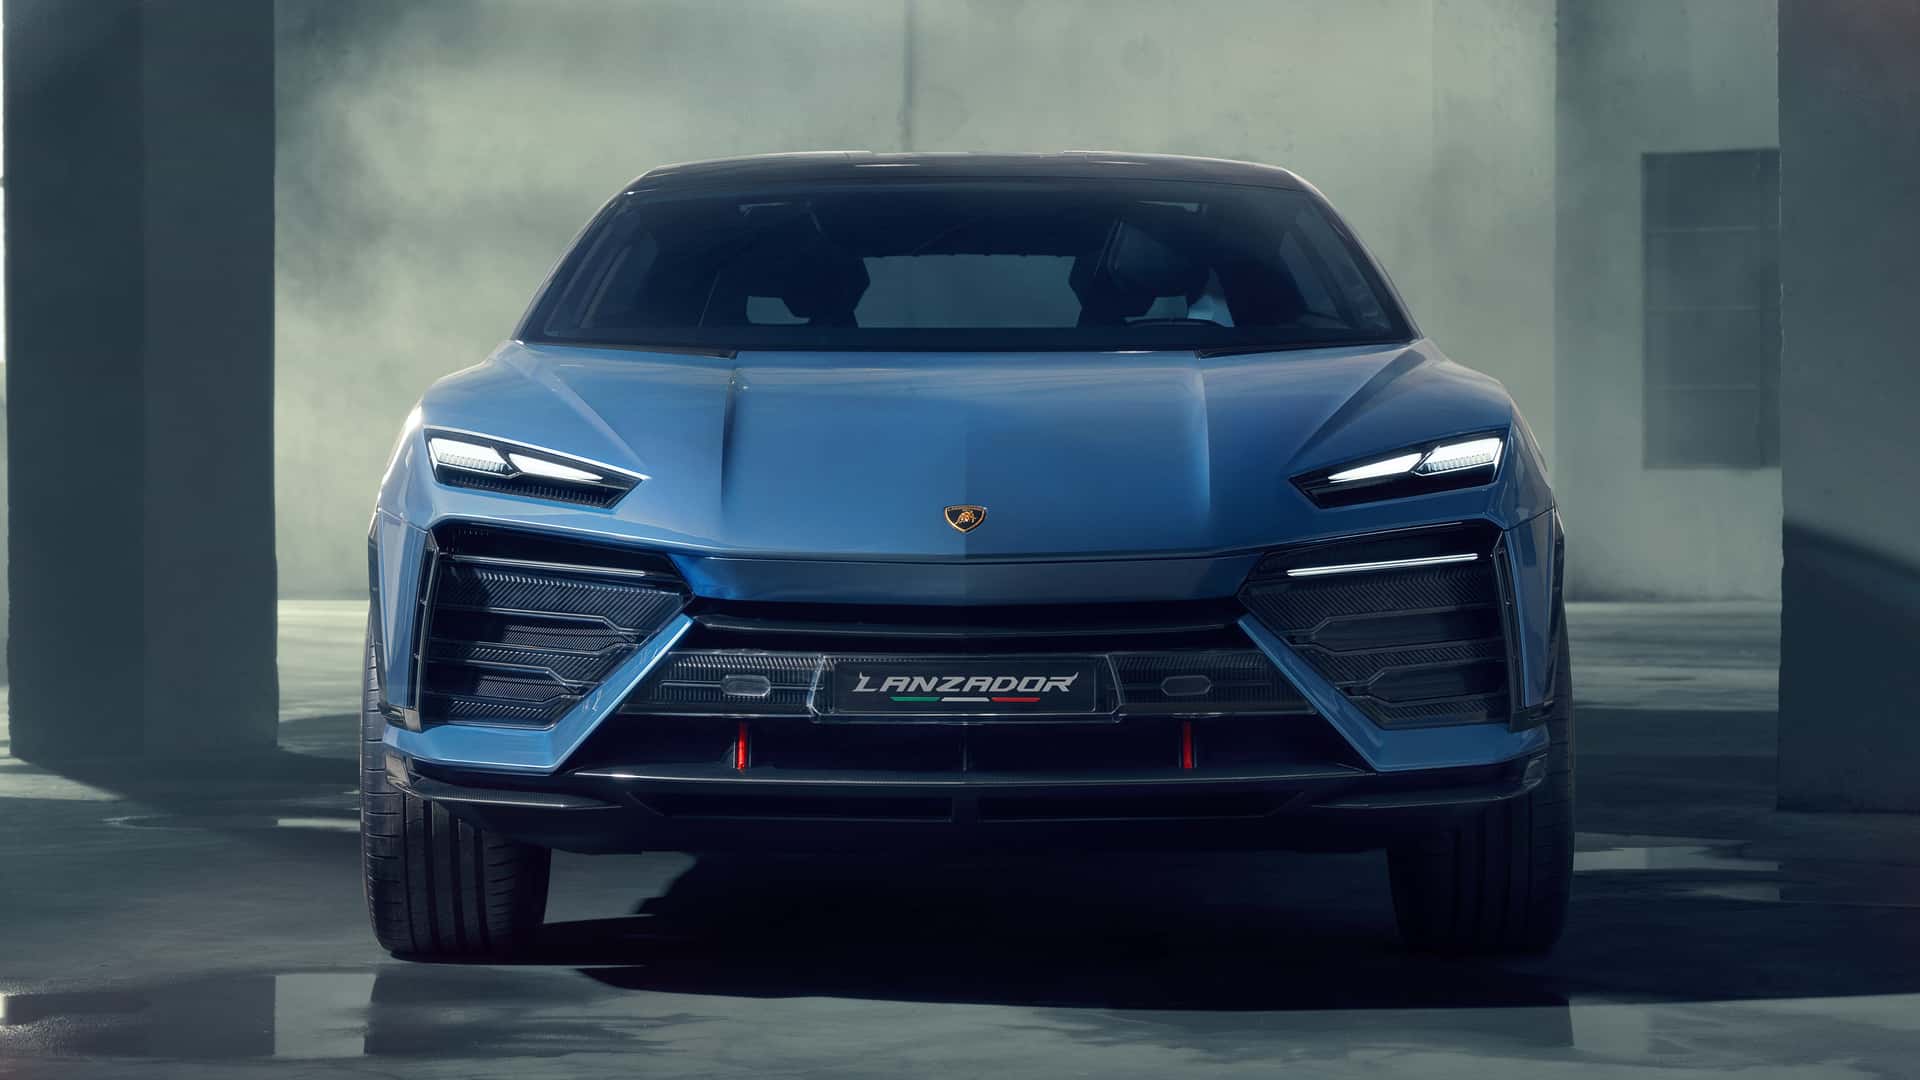 lamborghini design boss says lanzador ev was always going to have two doors